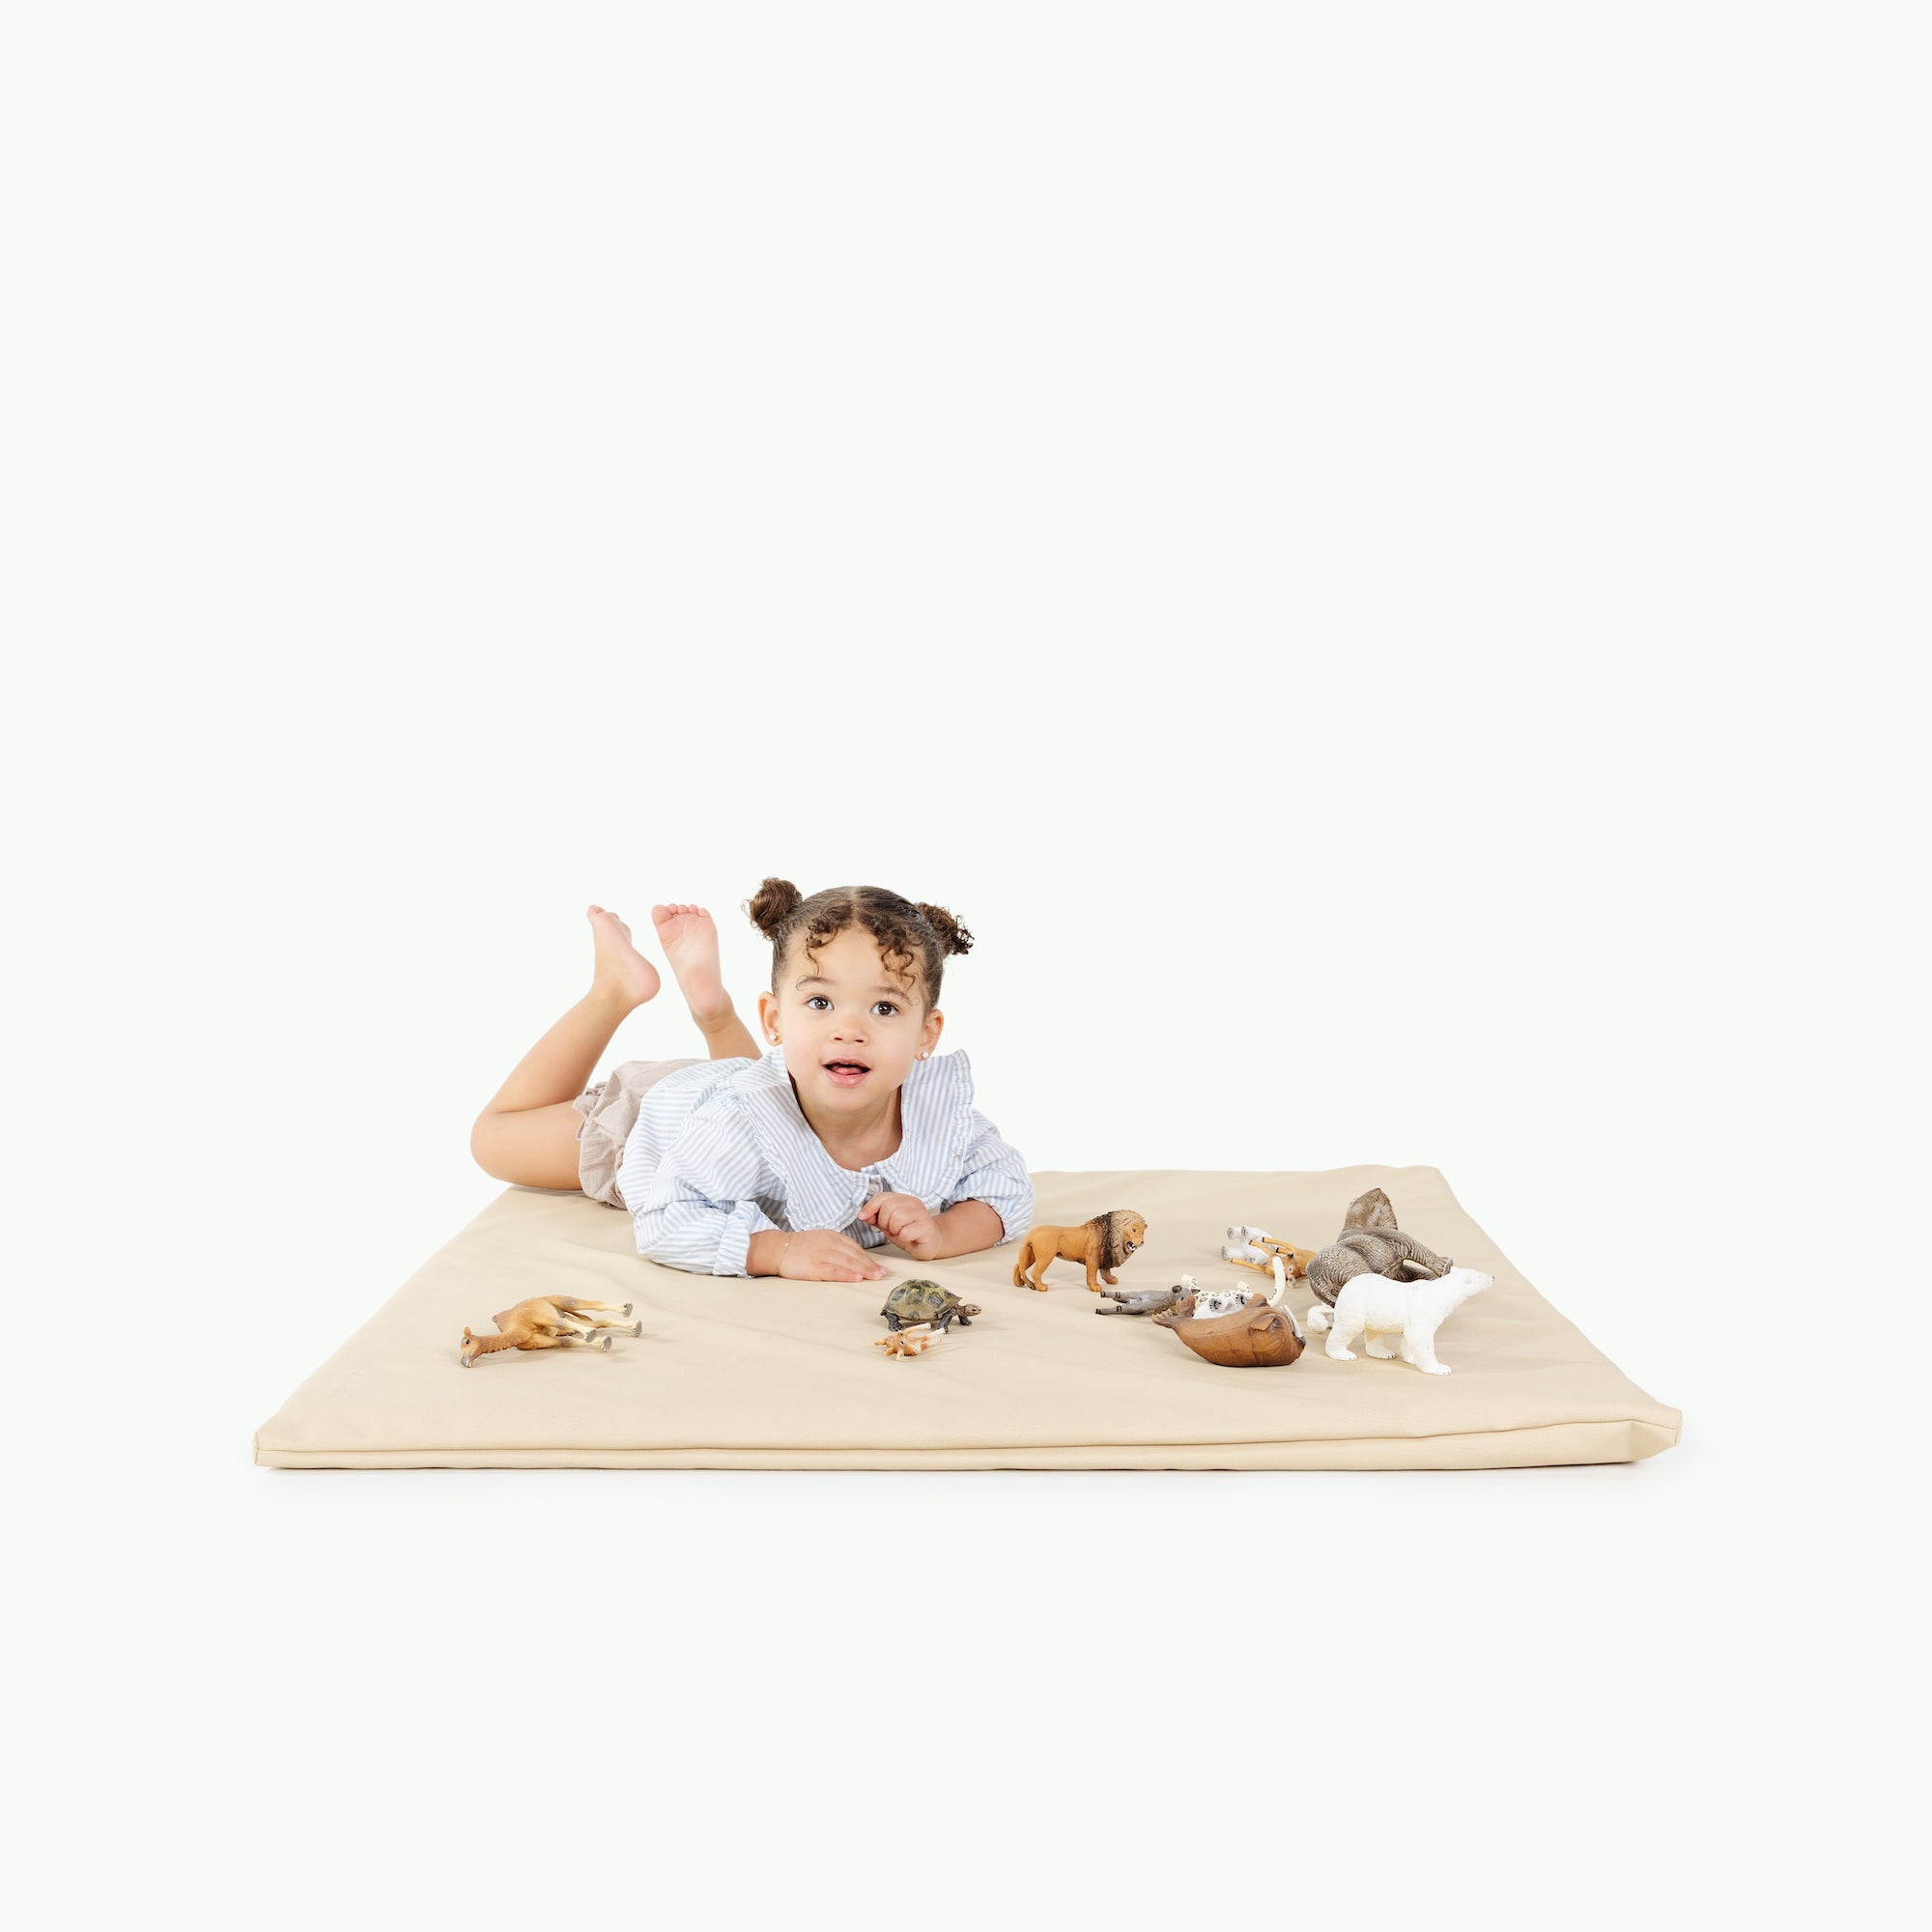 Créme / Square@little girl playing on padded mat